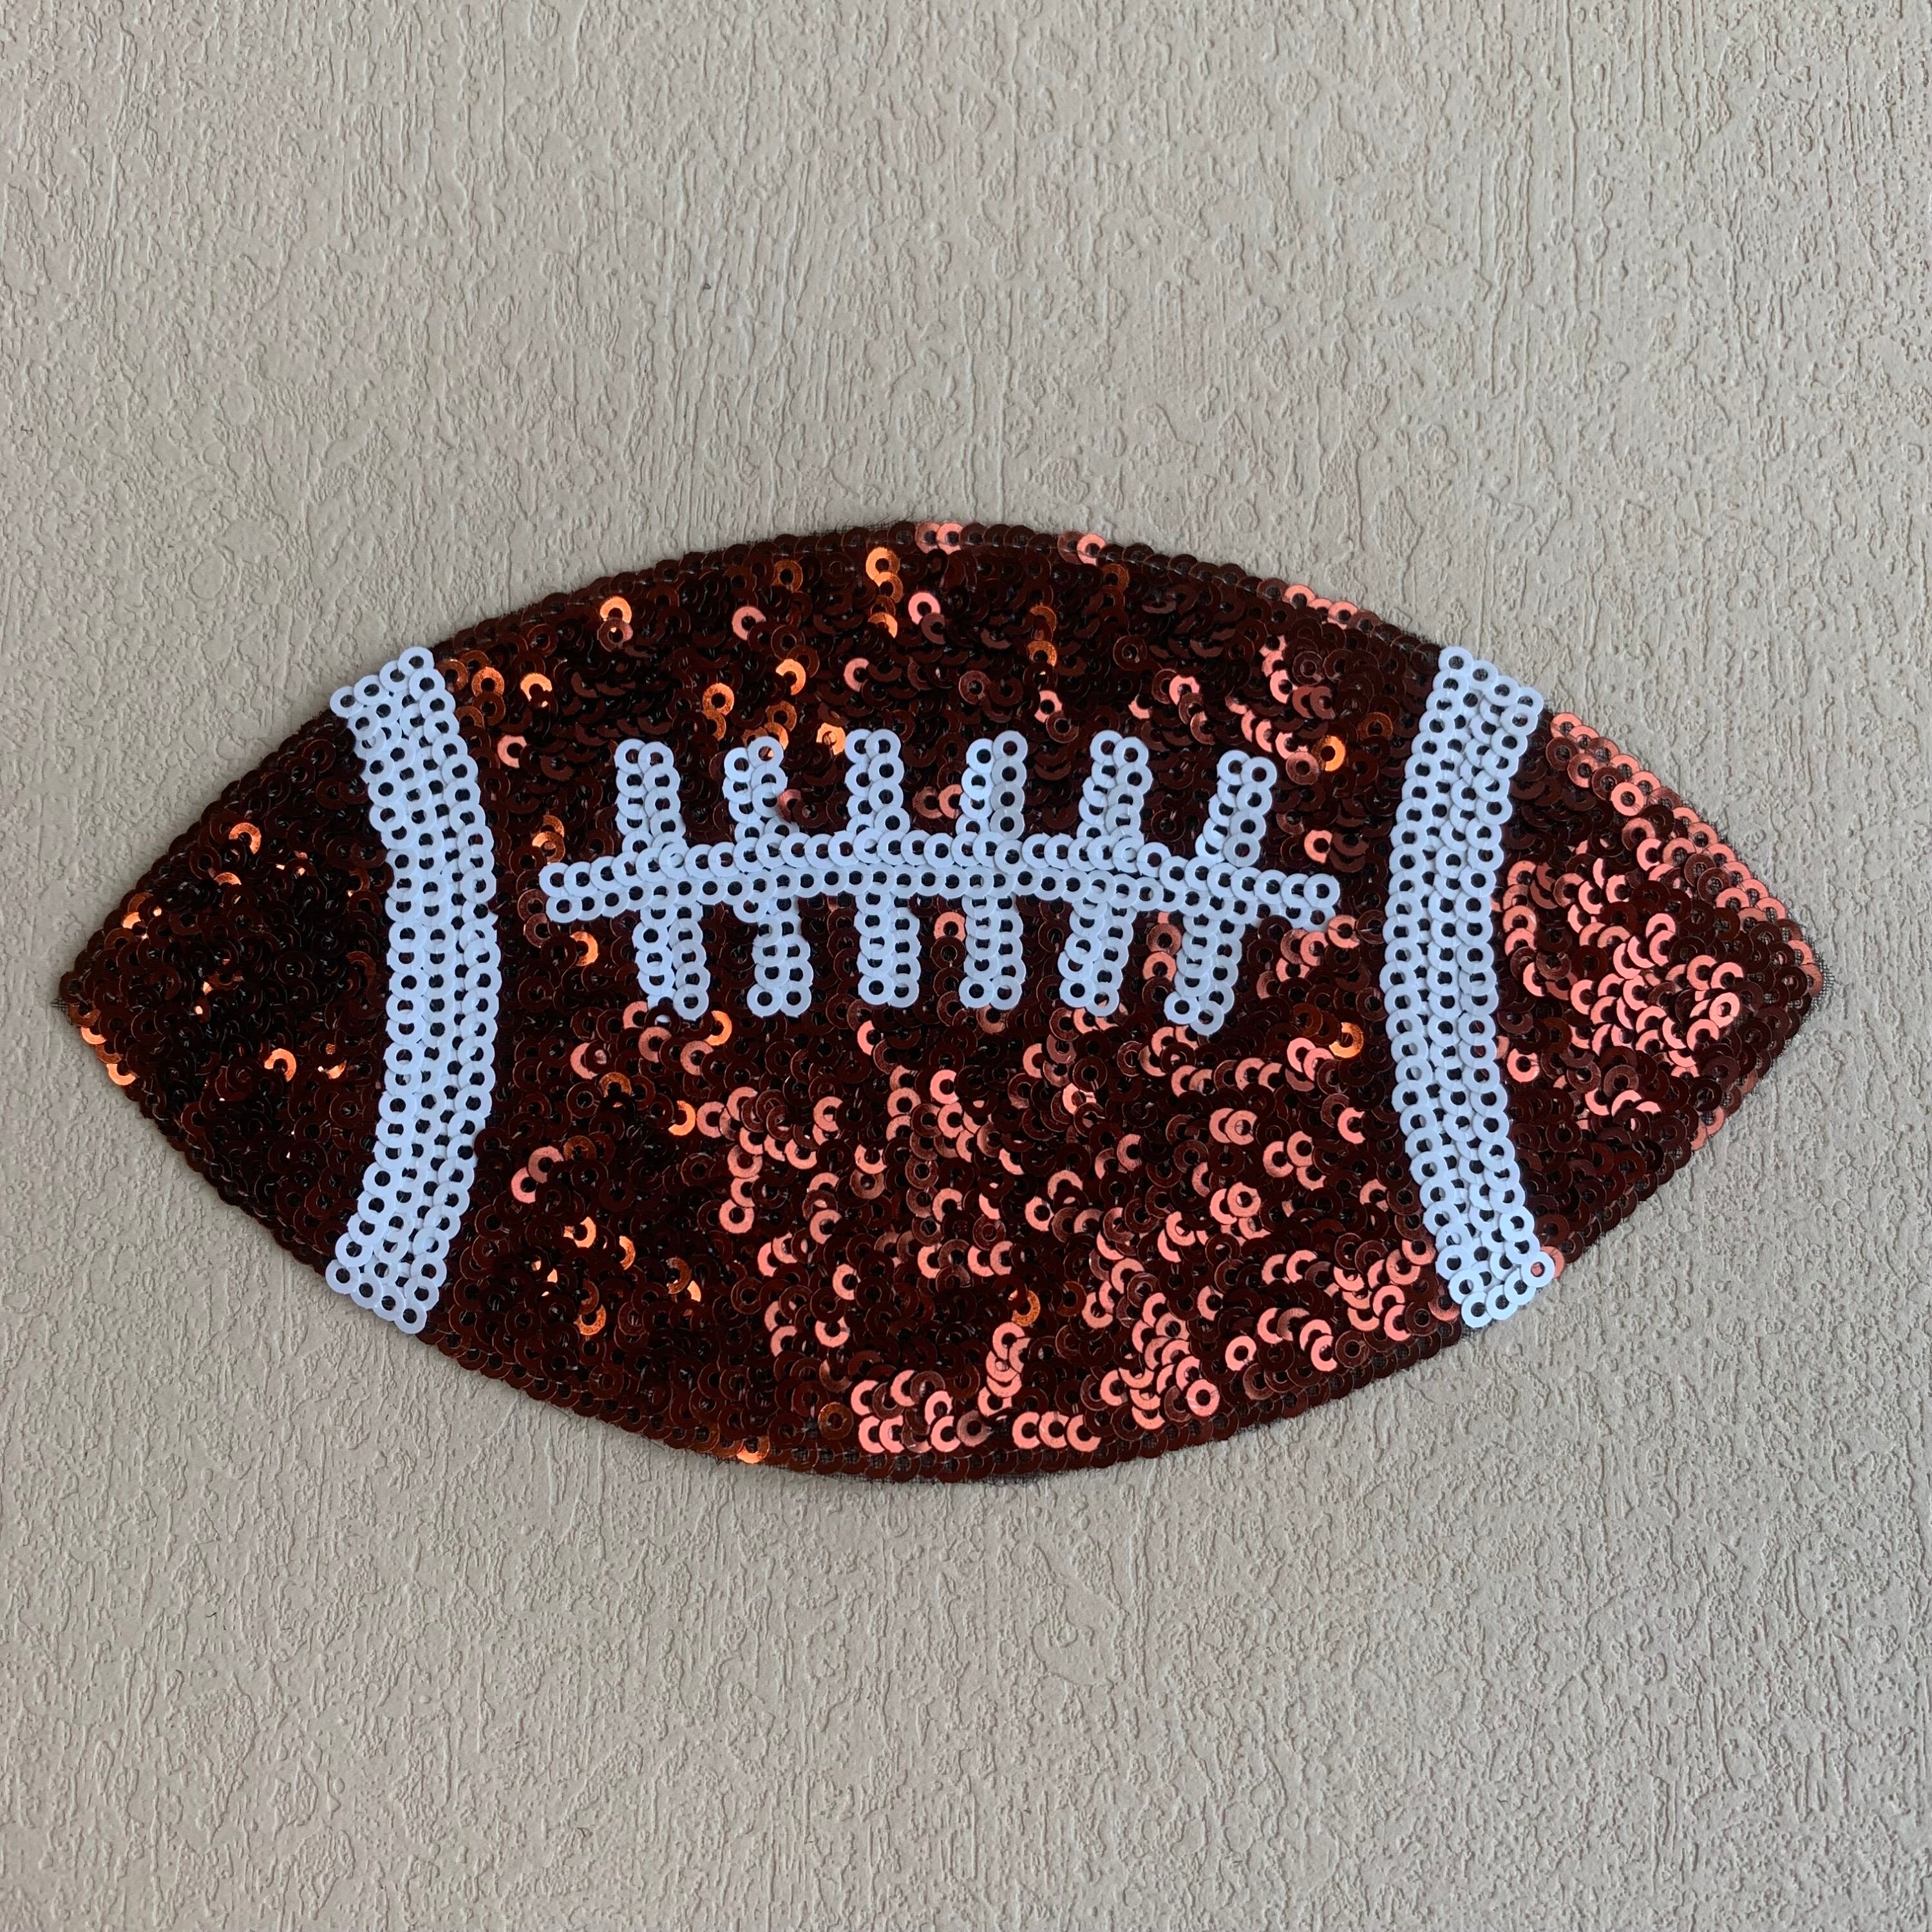 American Football Sequin Patches Rugby Applique For DIY Sewing On